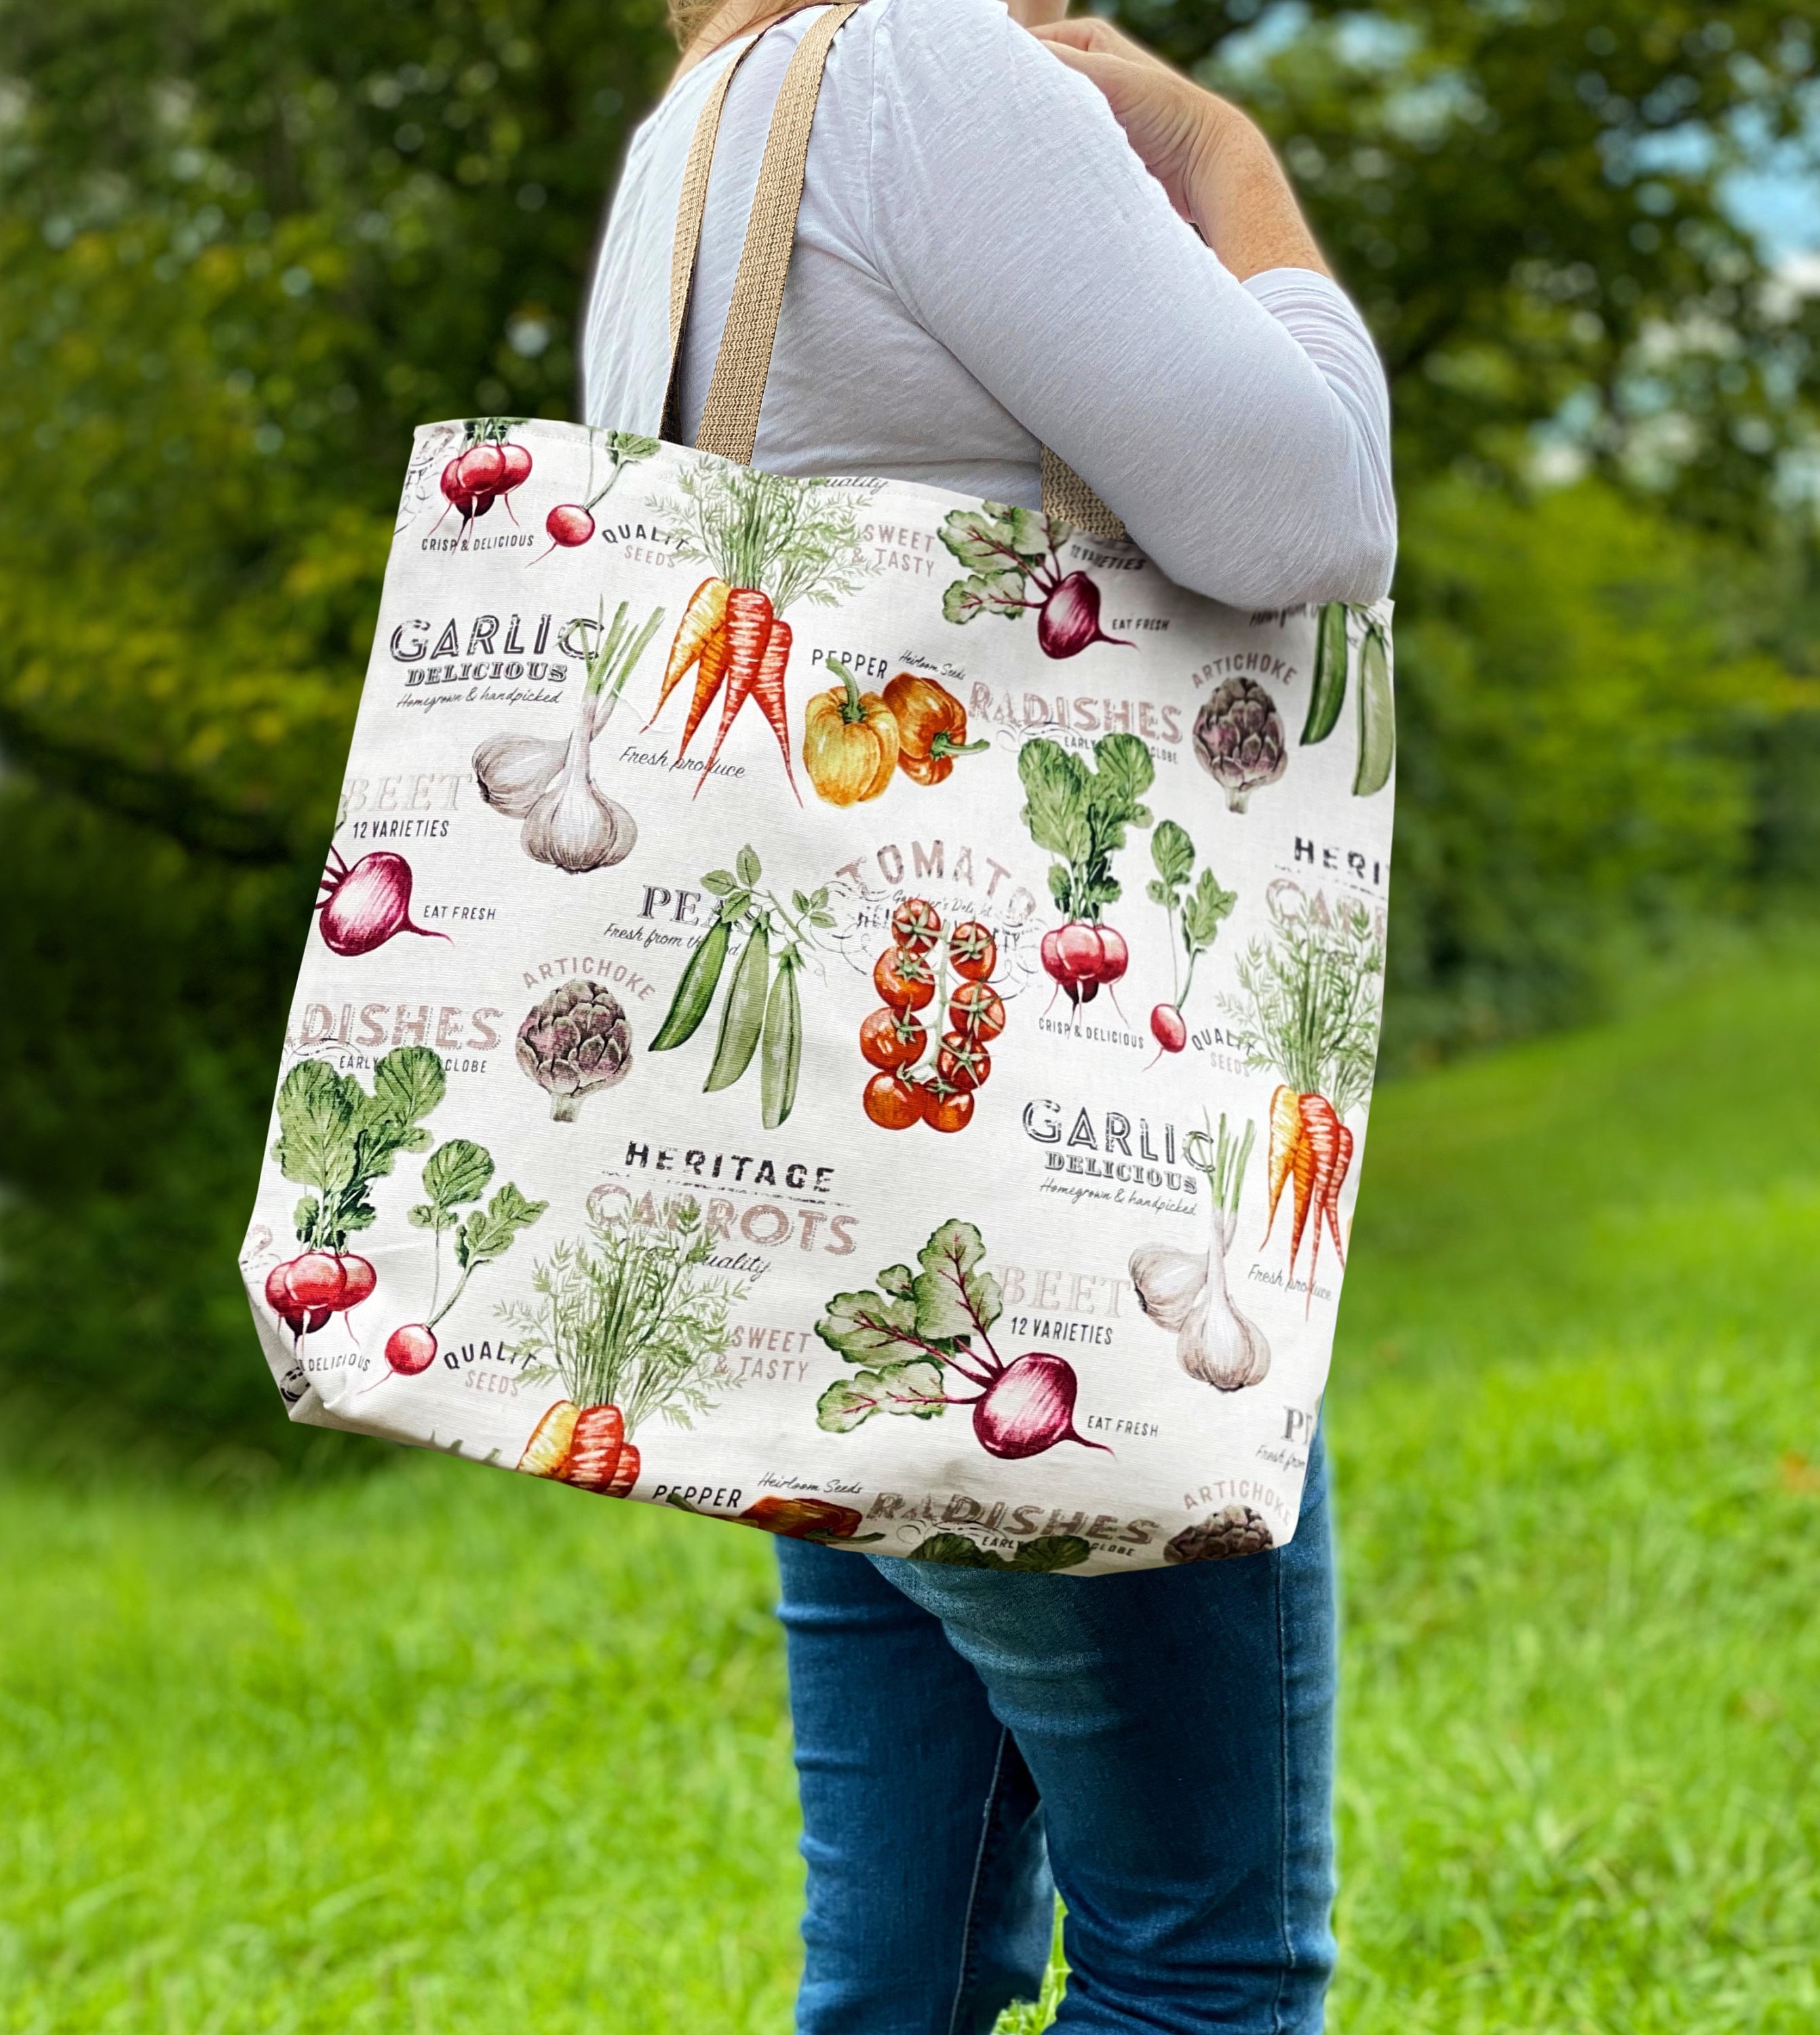 100% Organic Cotton Durable tote bags,Canvas Grocery Tote Bags cheap